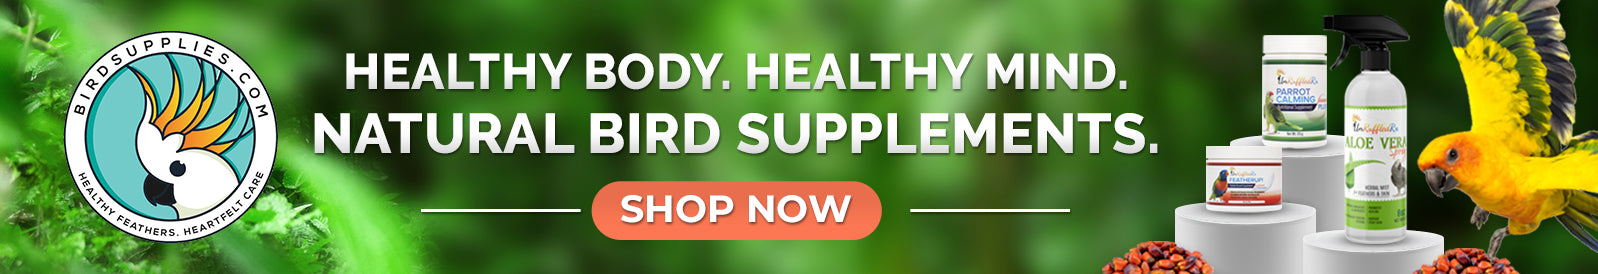 Bundle and save on bird supplements